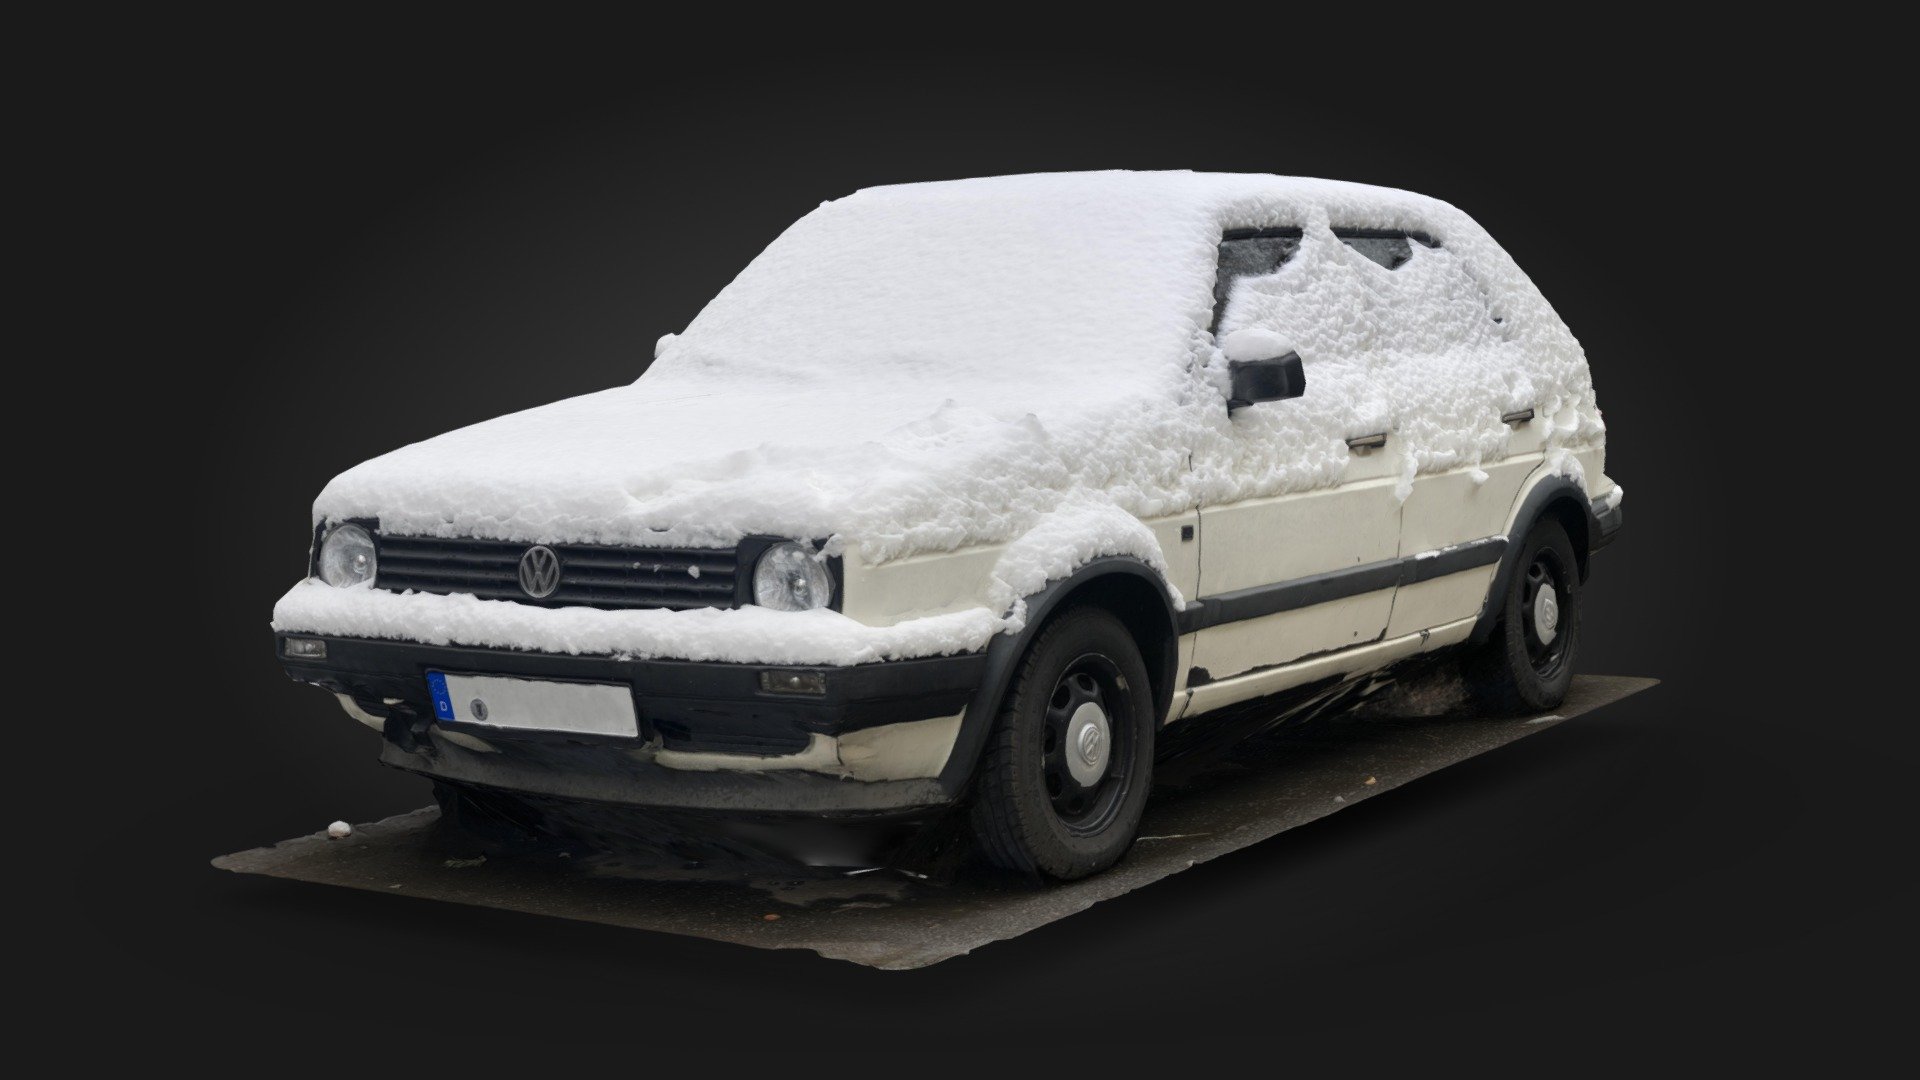 A smartphone Photogrammetry scan of a VW Golf II in Berlin, Germany after a snowy night!

This model was used as an example in my blog post for Optimizing Photogrammetry for Sketchfab 3d model